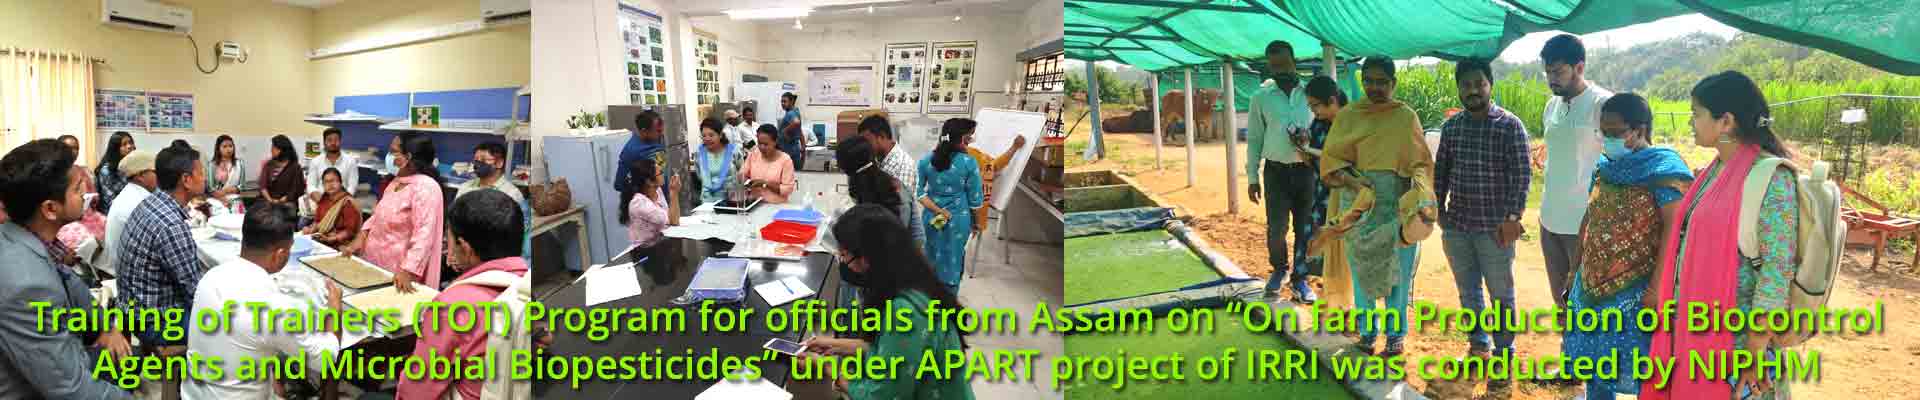 Training of Trainers (TOT) for officials from Assam on “On farm Production of Biocontrol Agents and Microbial Biopesticides” under APART project of IRRI was conducted @ NIPHM